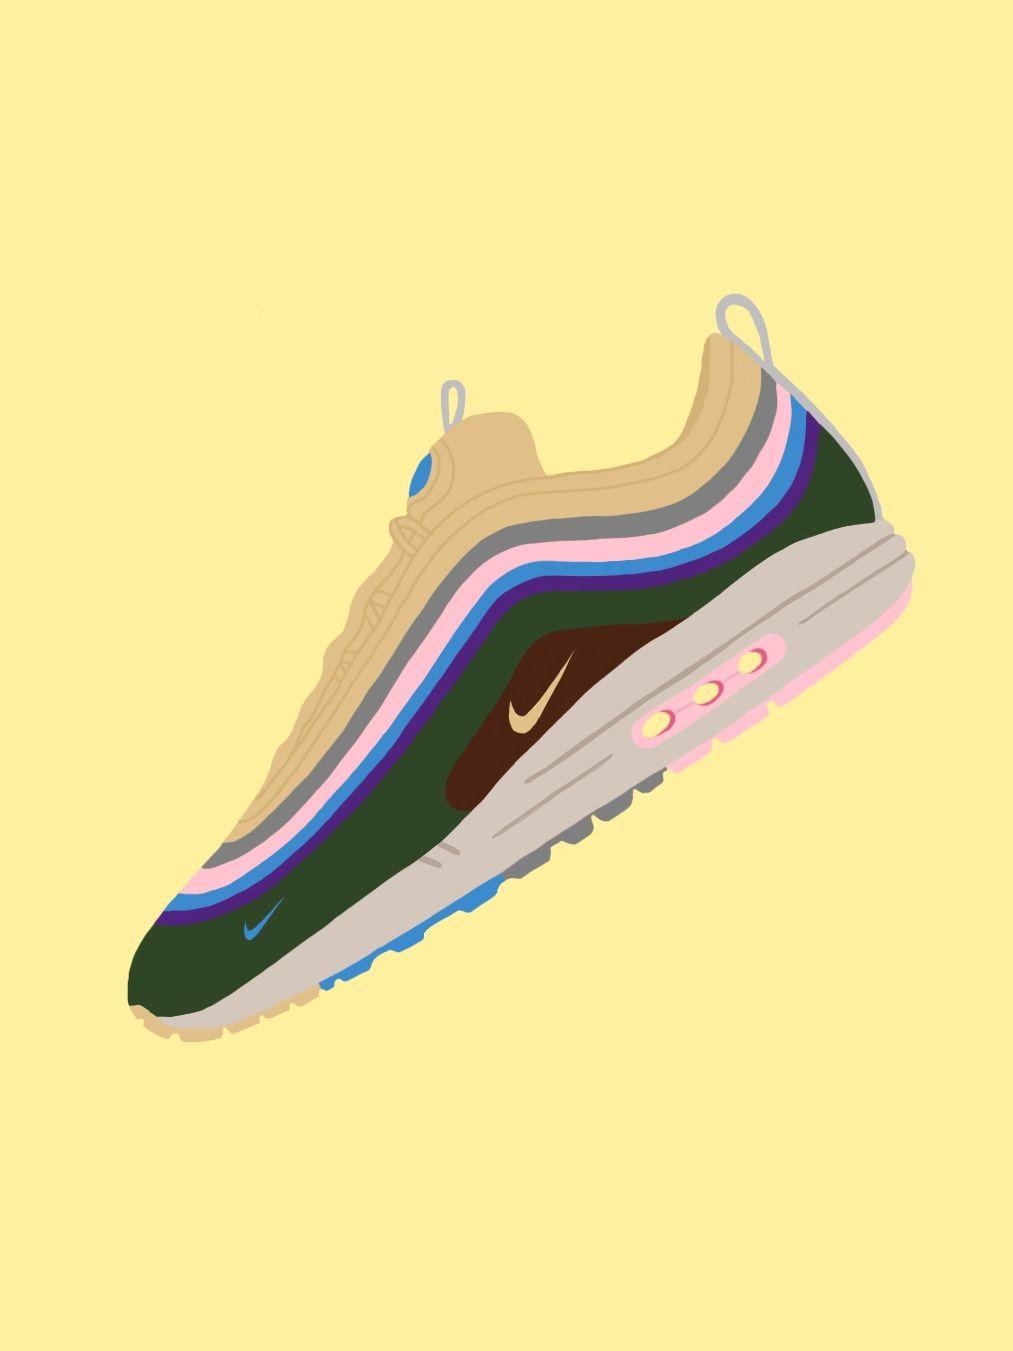 The Sean Wotherspoon X Air Max 97 1 Illustration #nike. Self